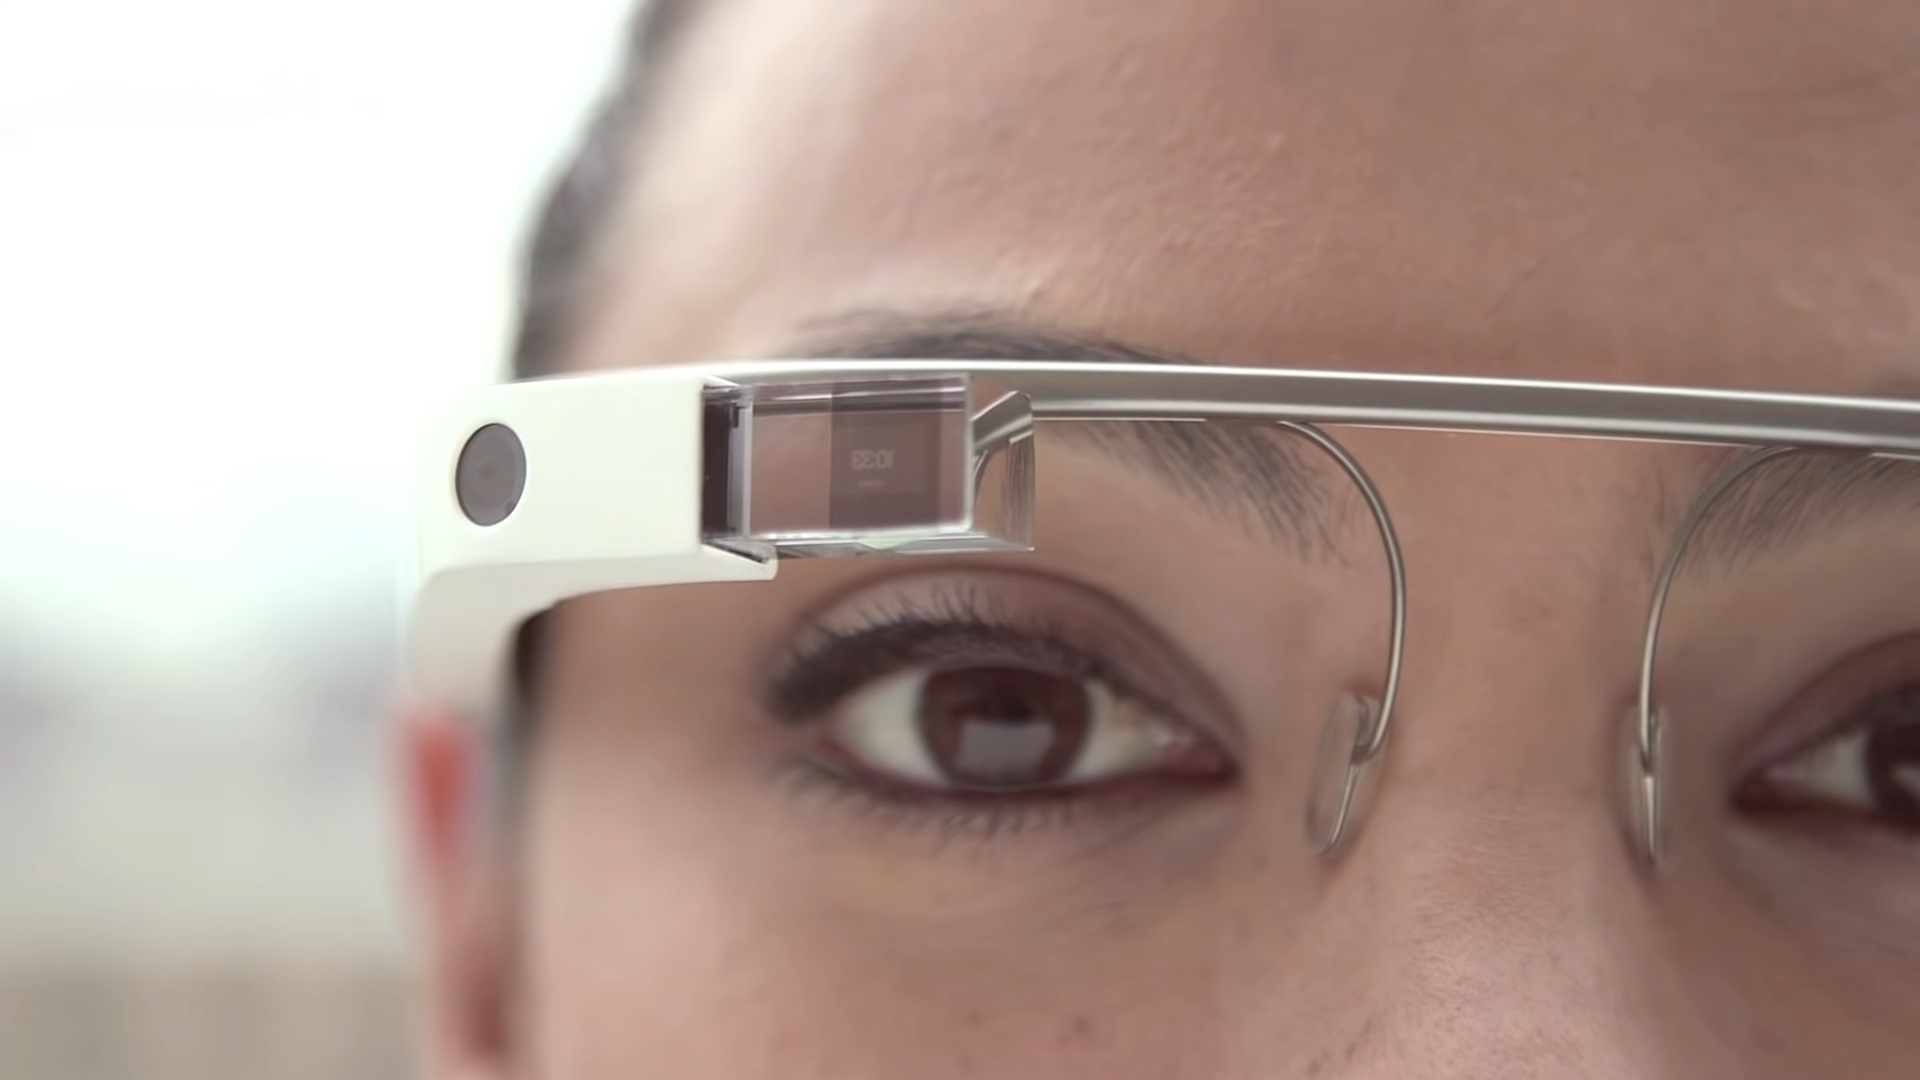  After a decade of hanging on, Google officially discontinues the last of its Glass headsets 